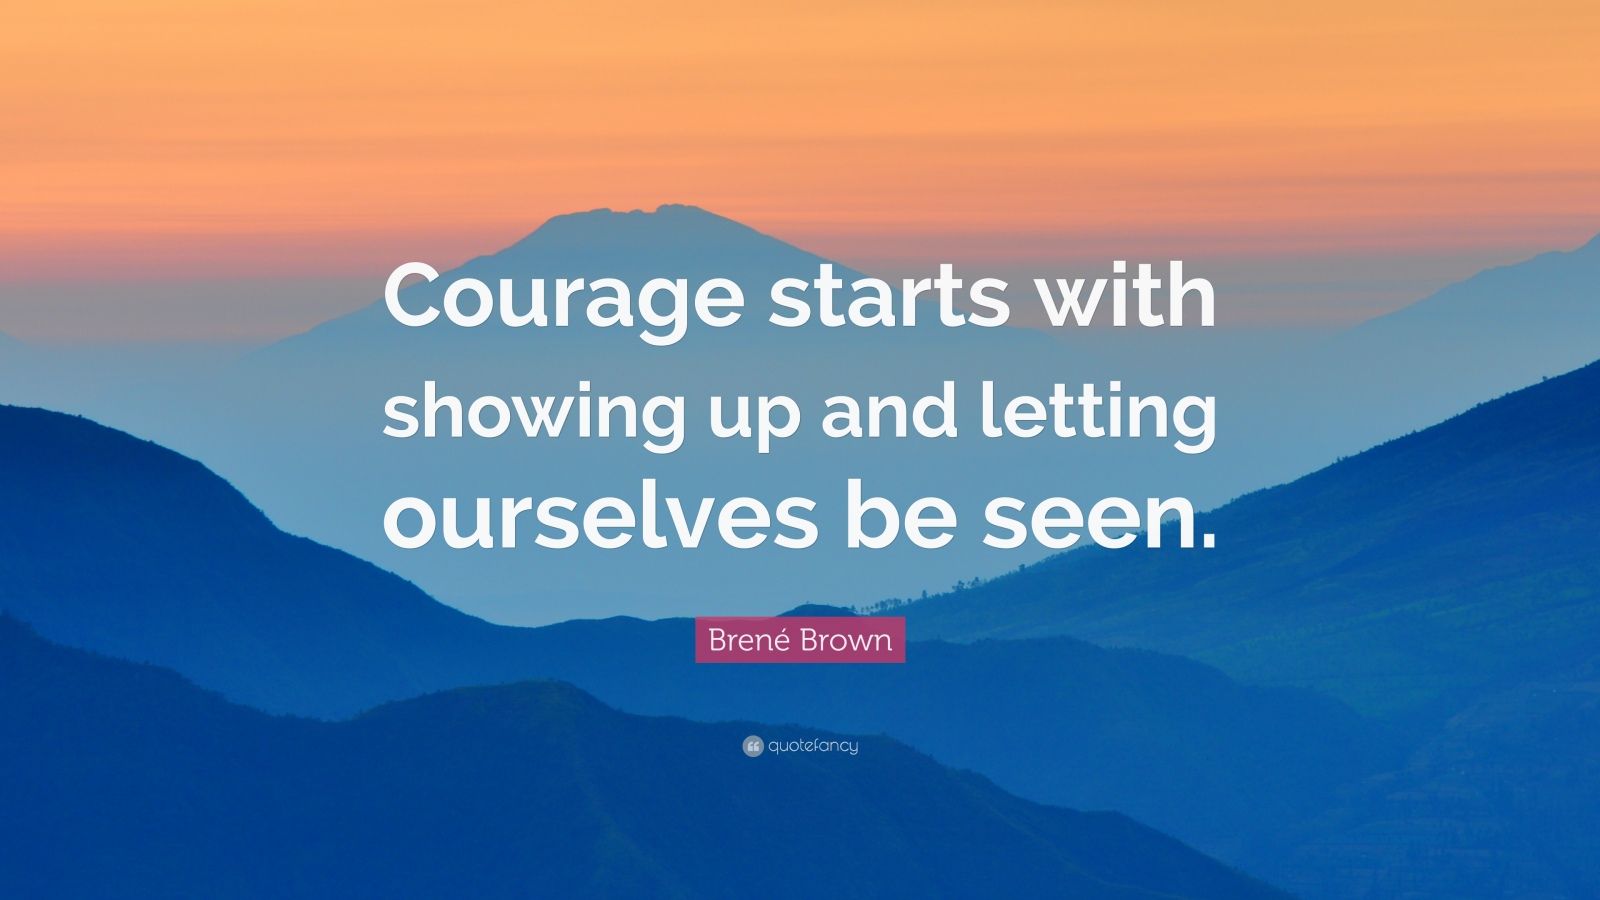 Brené Brown Quote: “Courage starts with showing up and letting ...